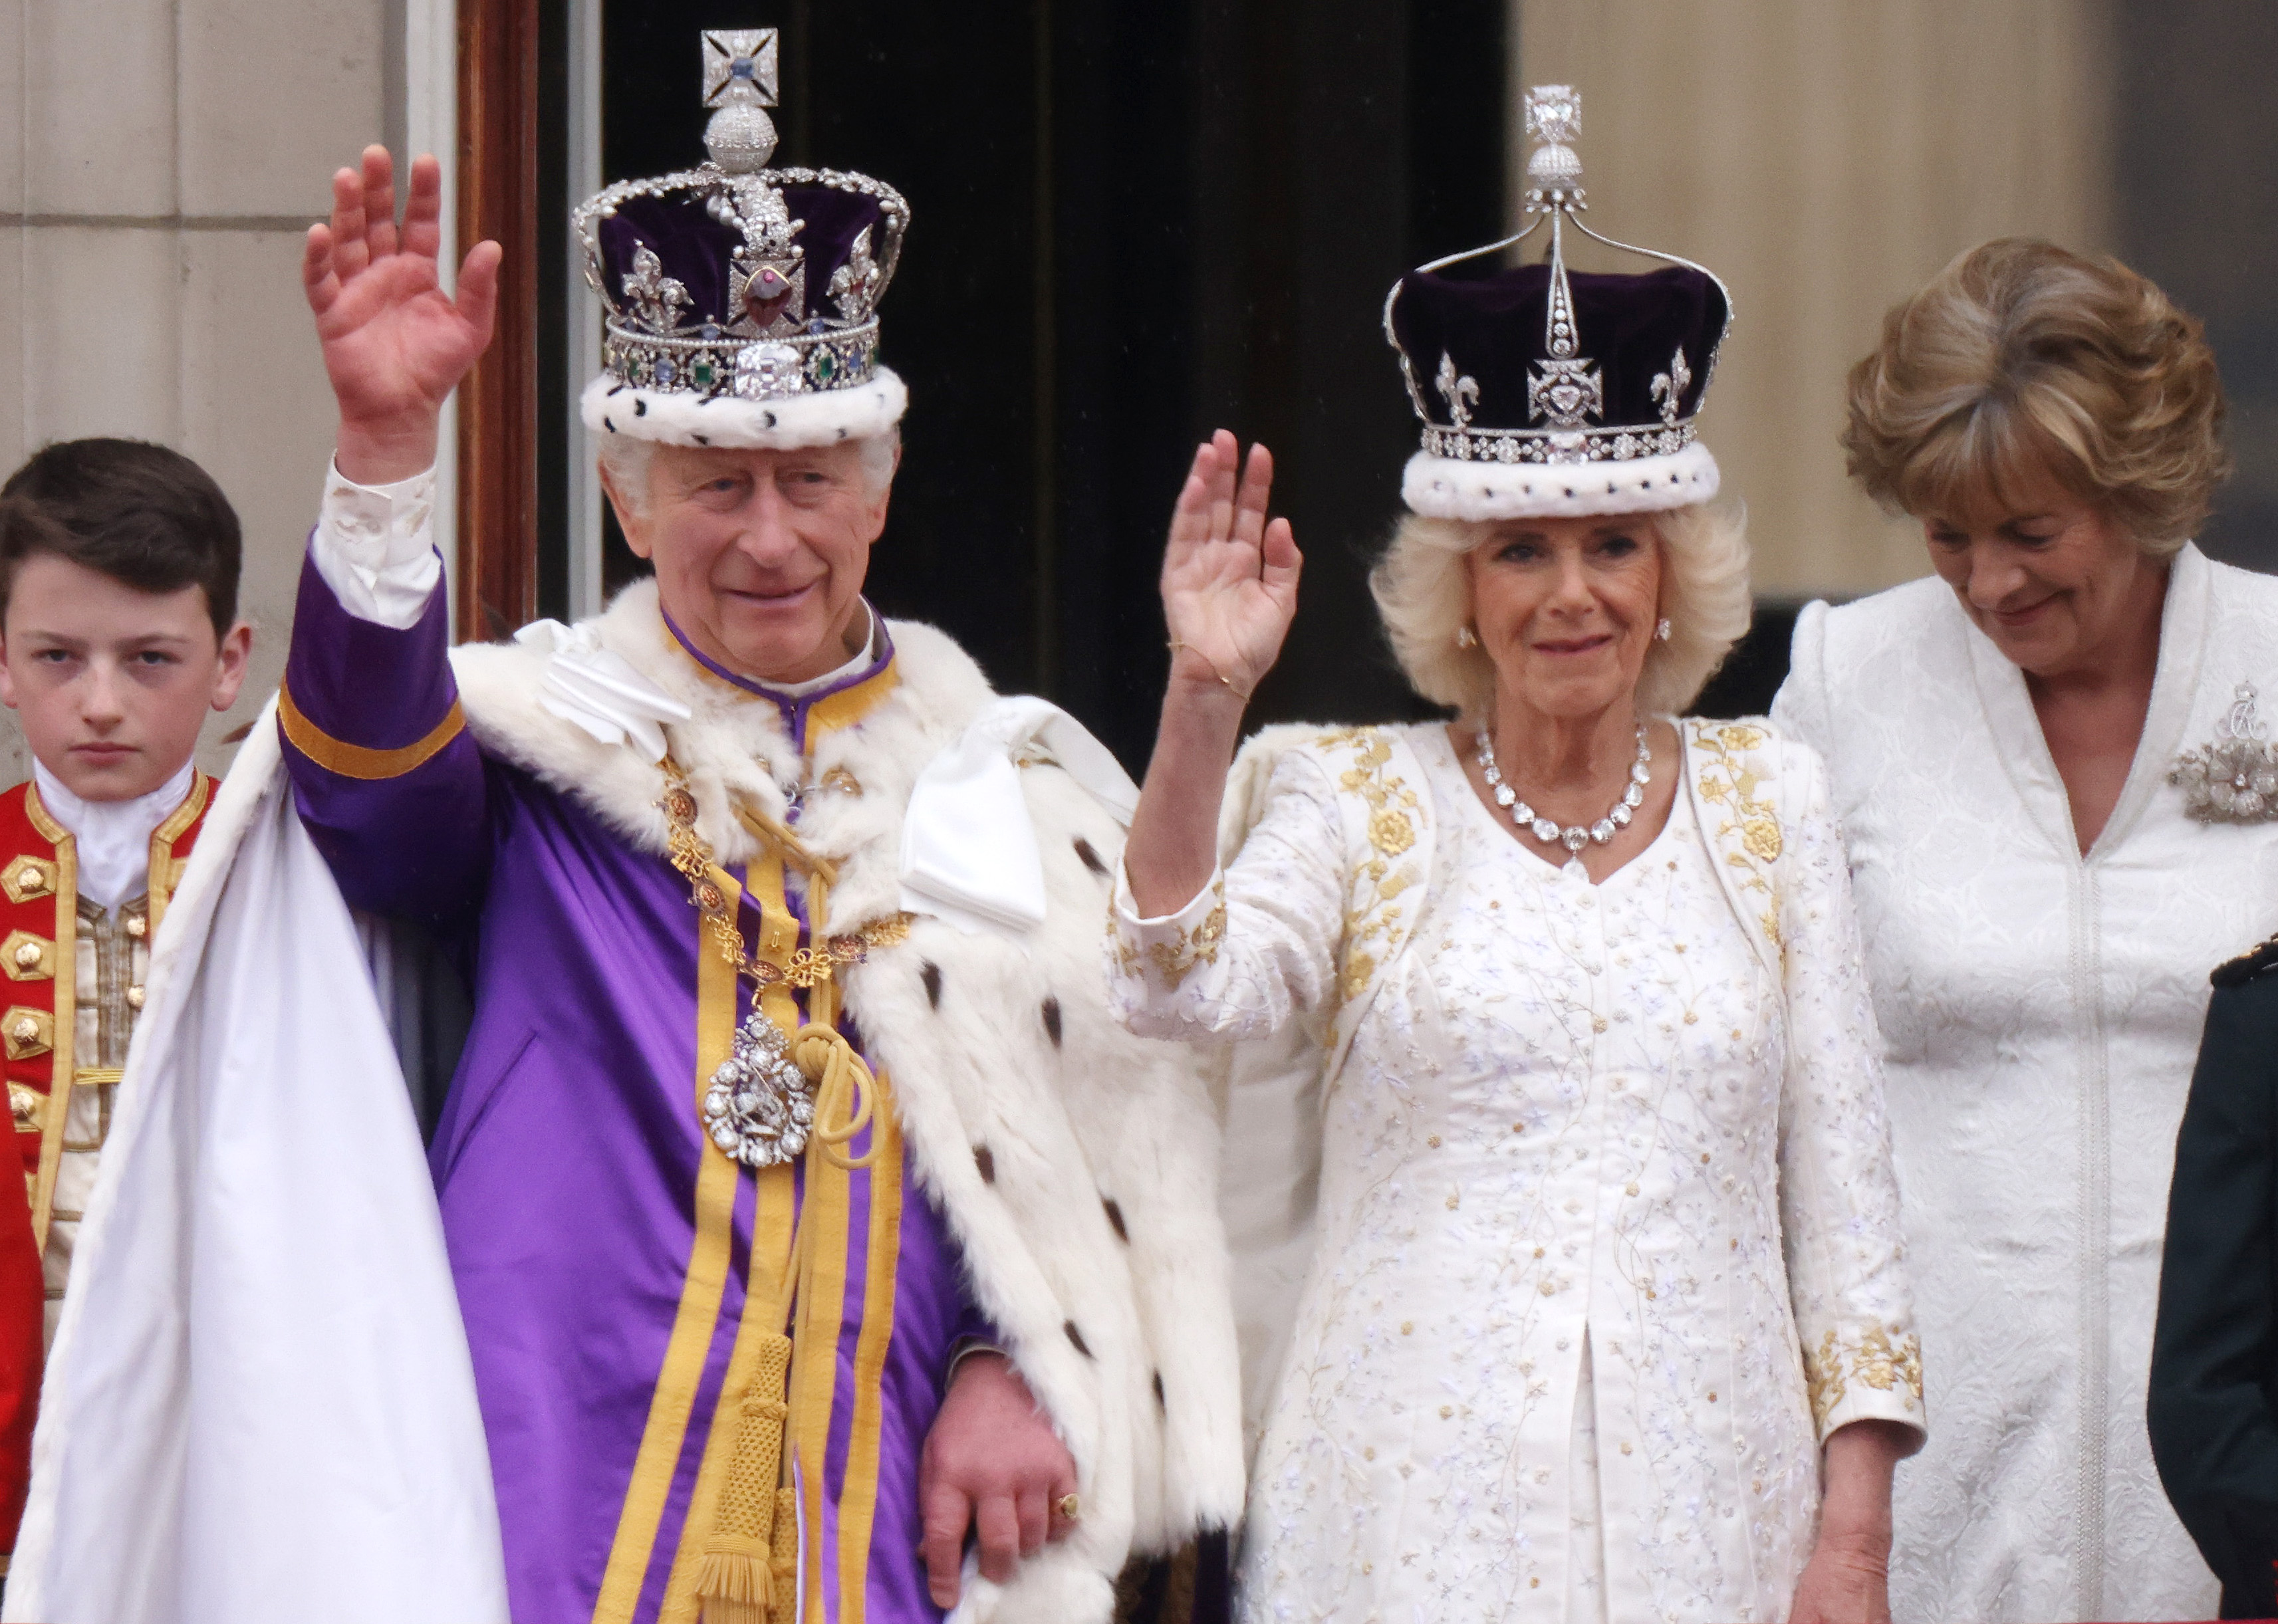 King Charles III and Queen Camilla at the Buckingham Palace balcony during their Coronation on May 06, 2023 | Source: Getty Images